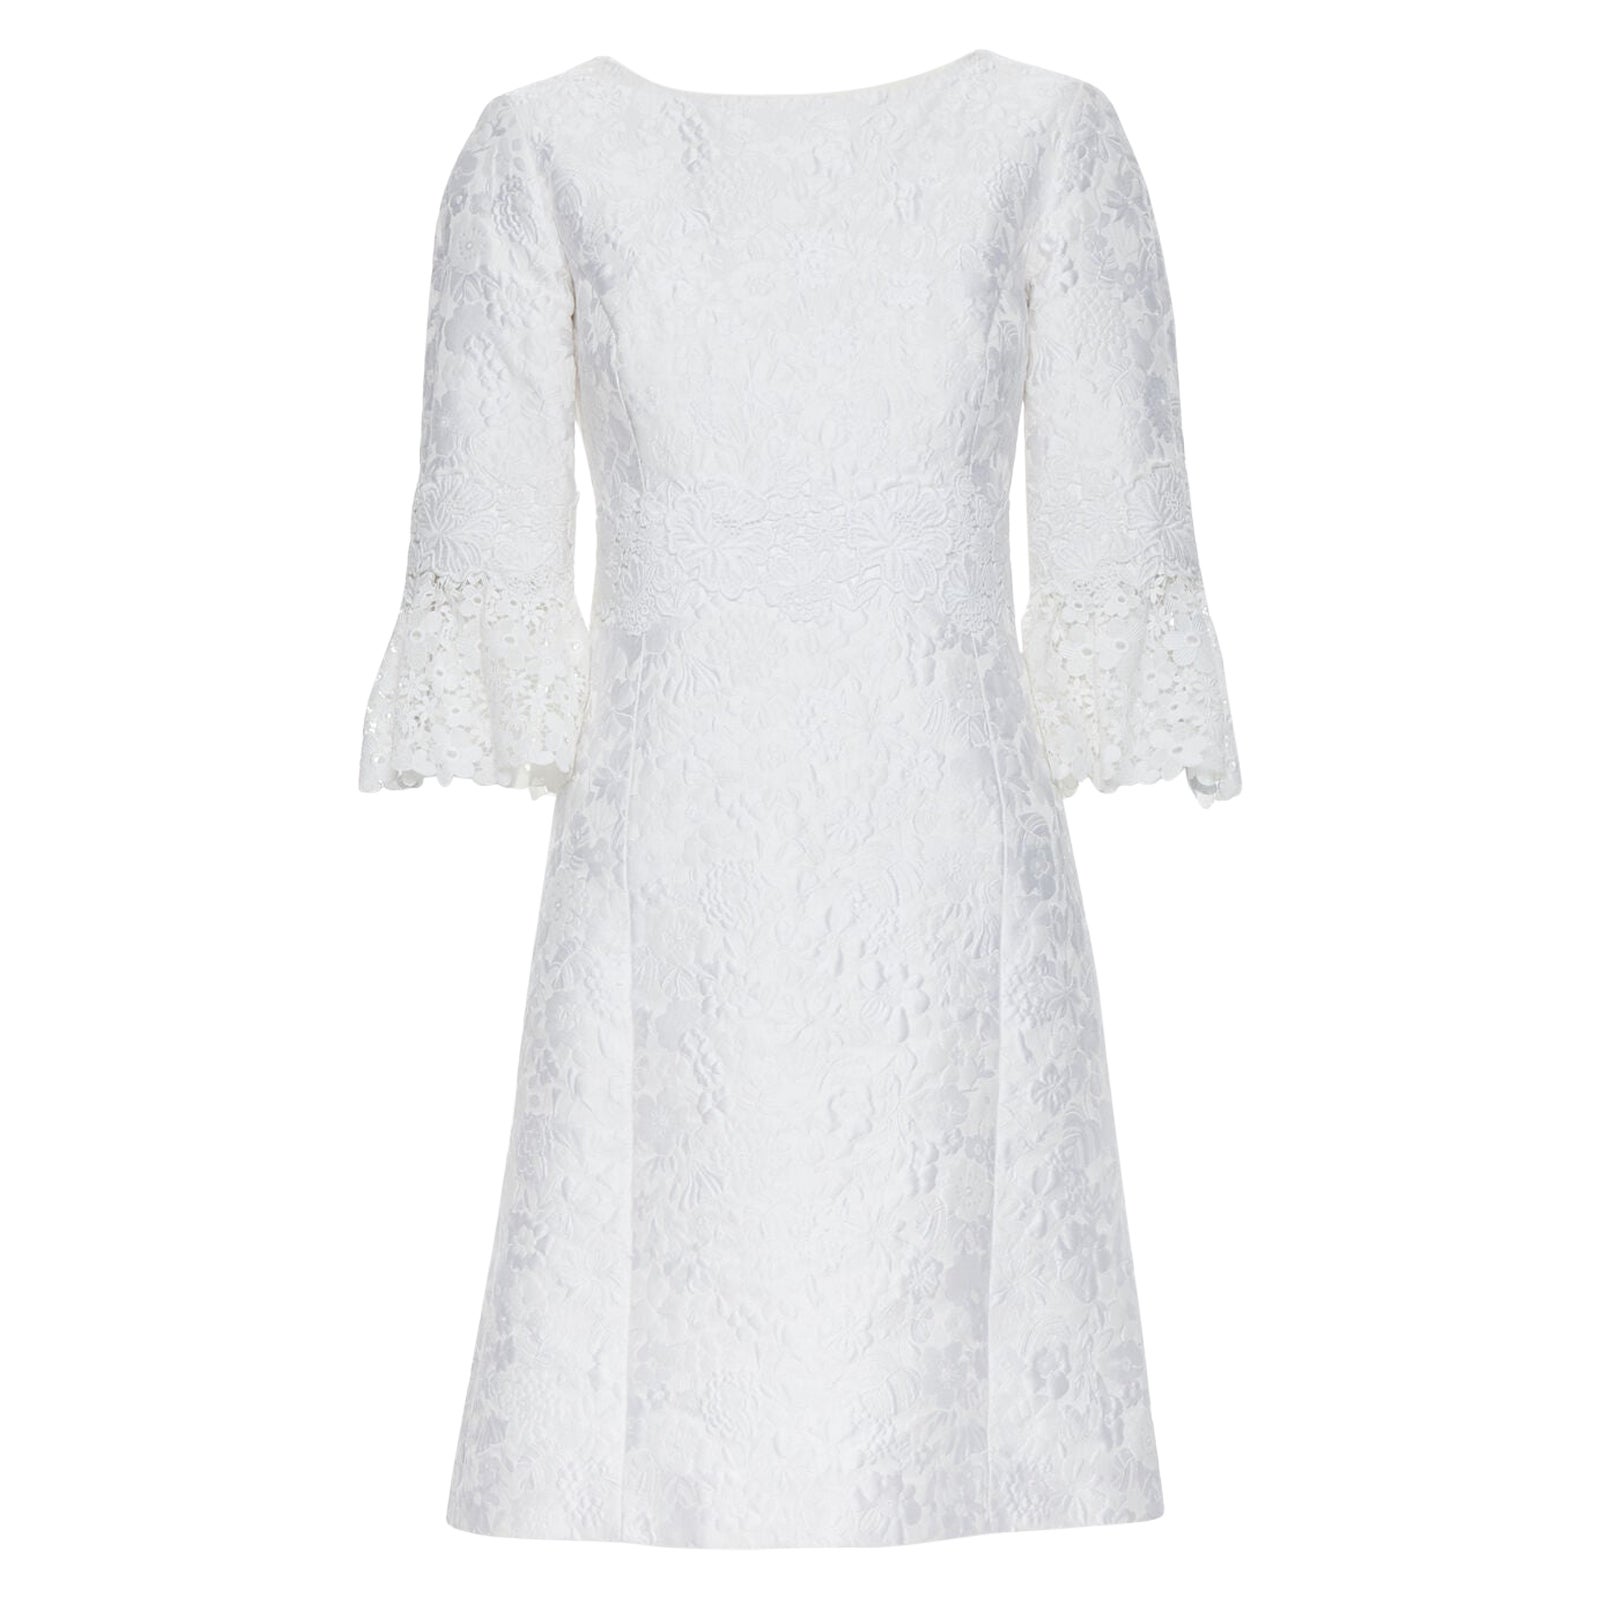 MICHAEL KORS COLLECTION white floral cloque lace trimmed 3/4 sleeve dress US0 For Sale